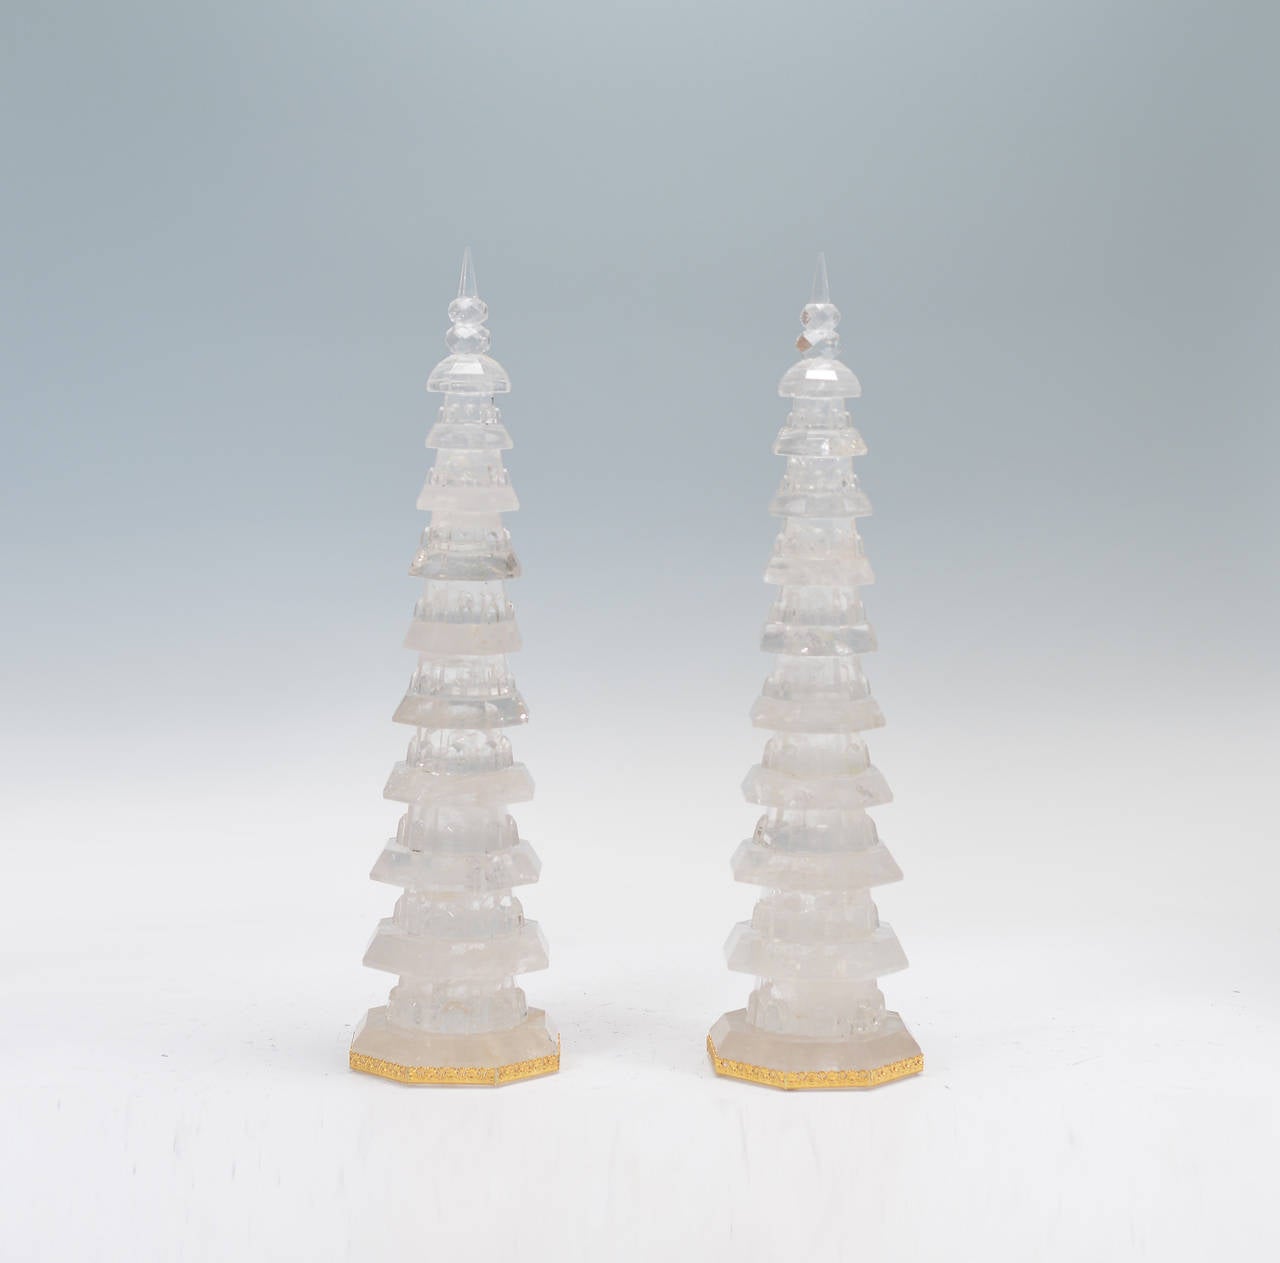 Pair of fine carved rock crystal pagodas rising from the gilt embellished bases, with delicate details on each octagonal storey, and double gourd finials.